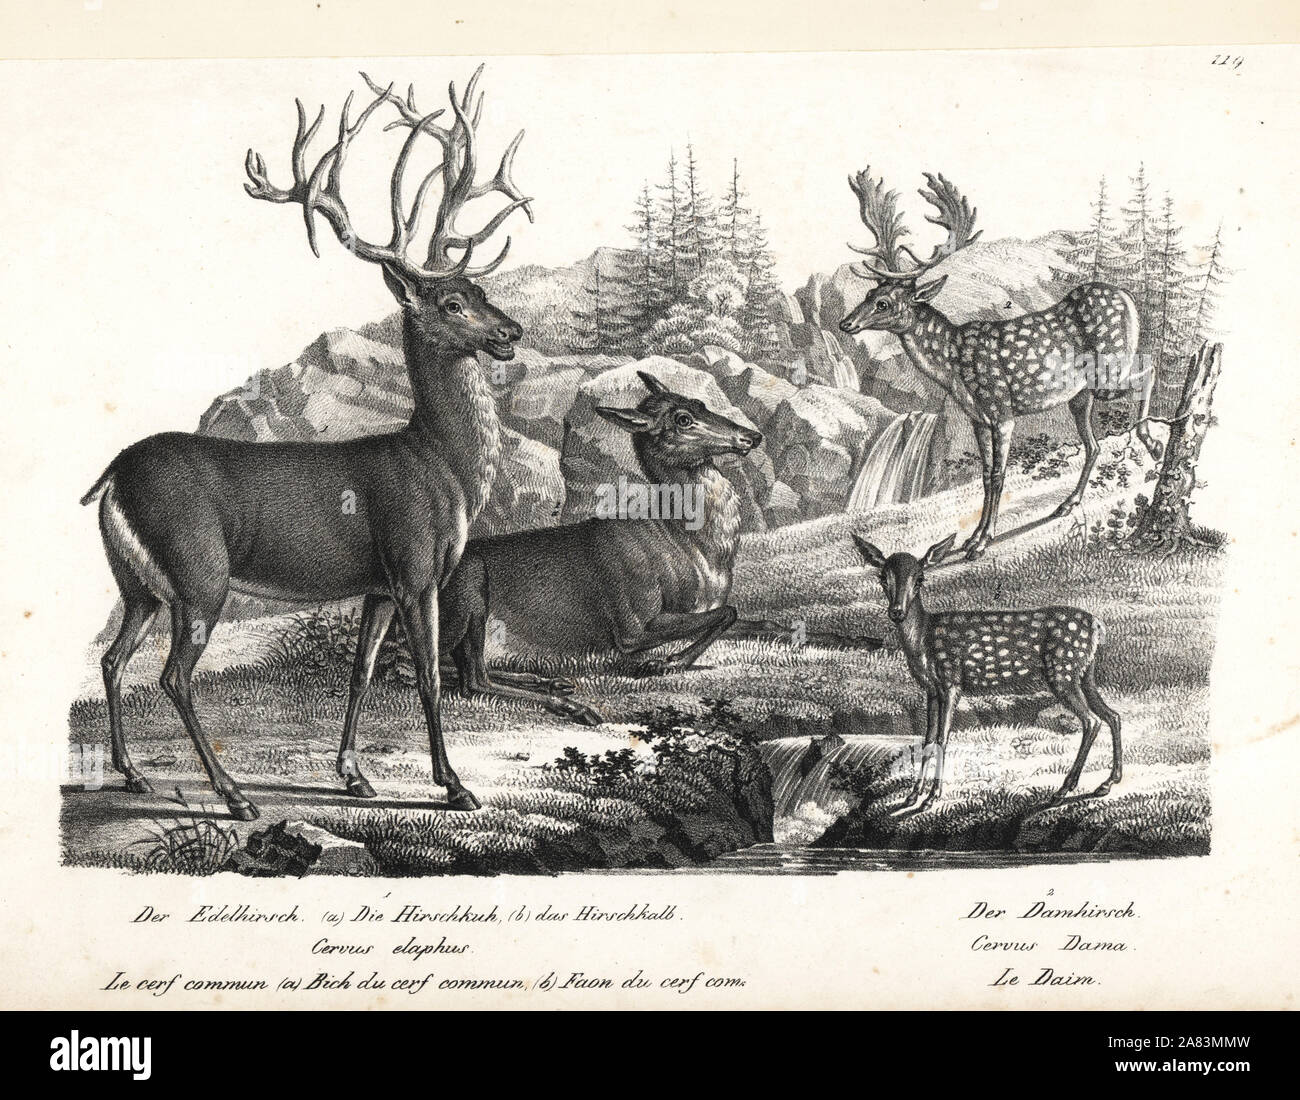 Red deer, Cervus elaphus, and fallow deer, Dama dama. Lithograph by Karl Joseph Brodtmann from Heinrich Rudolf Schinz's Illustrated Natural History of Men and Animals, 1836. Stock Photo